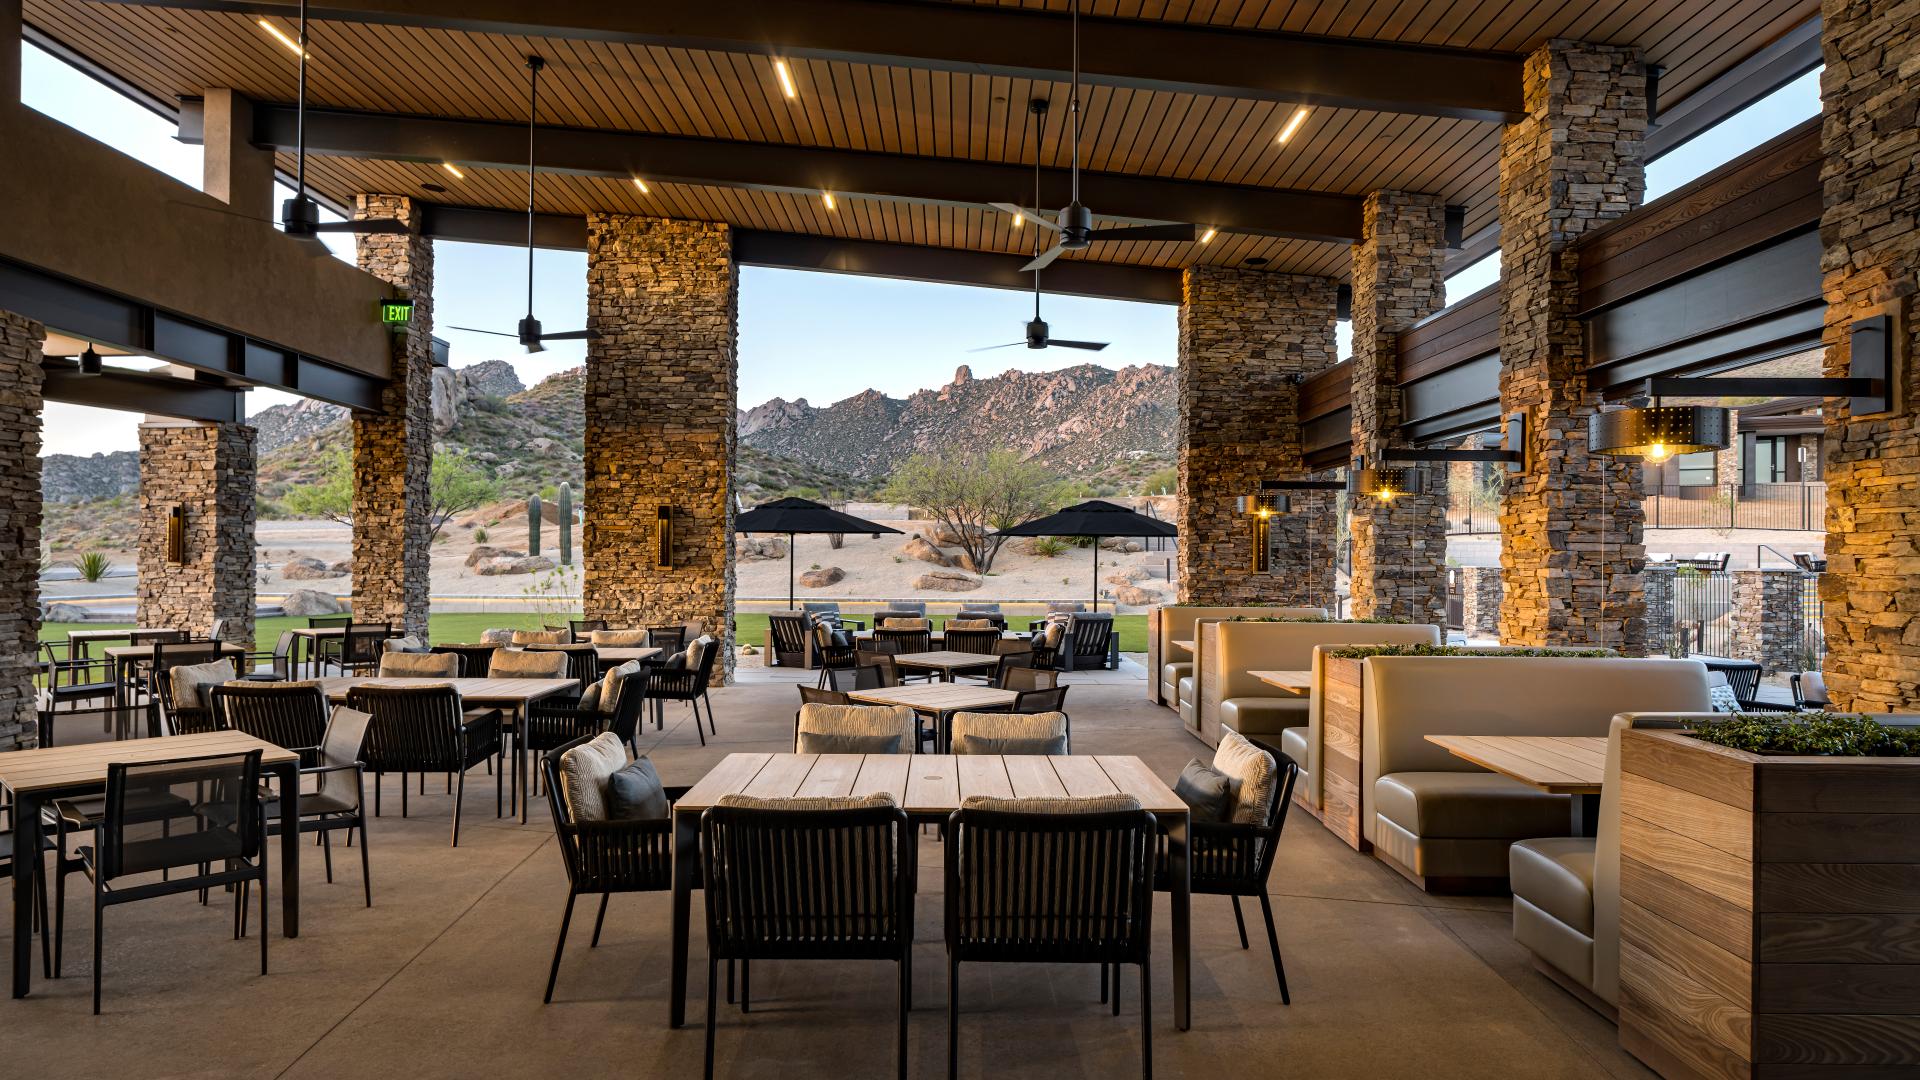 Outdoor dining space with incredible mountain views